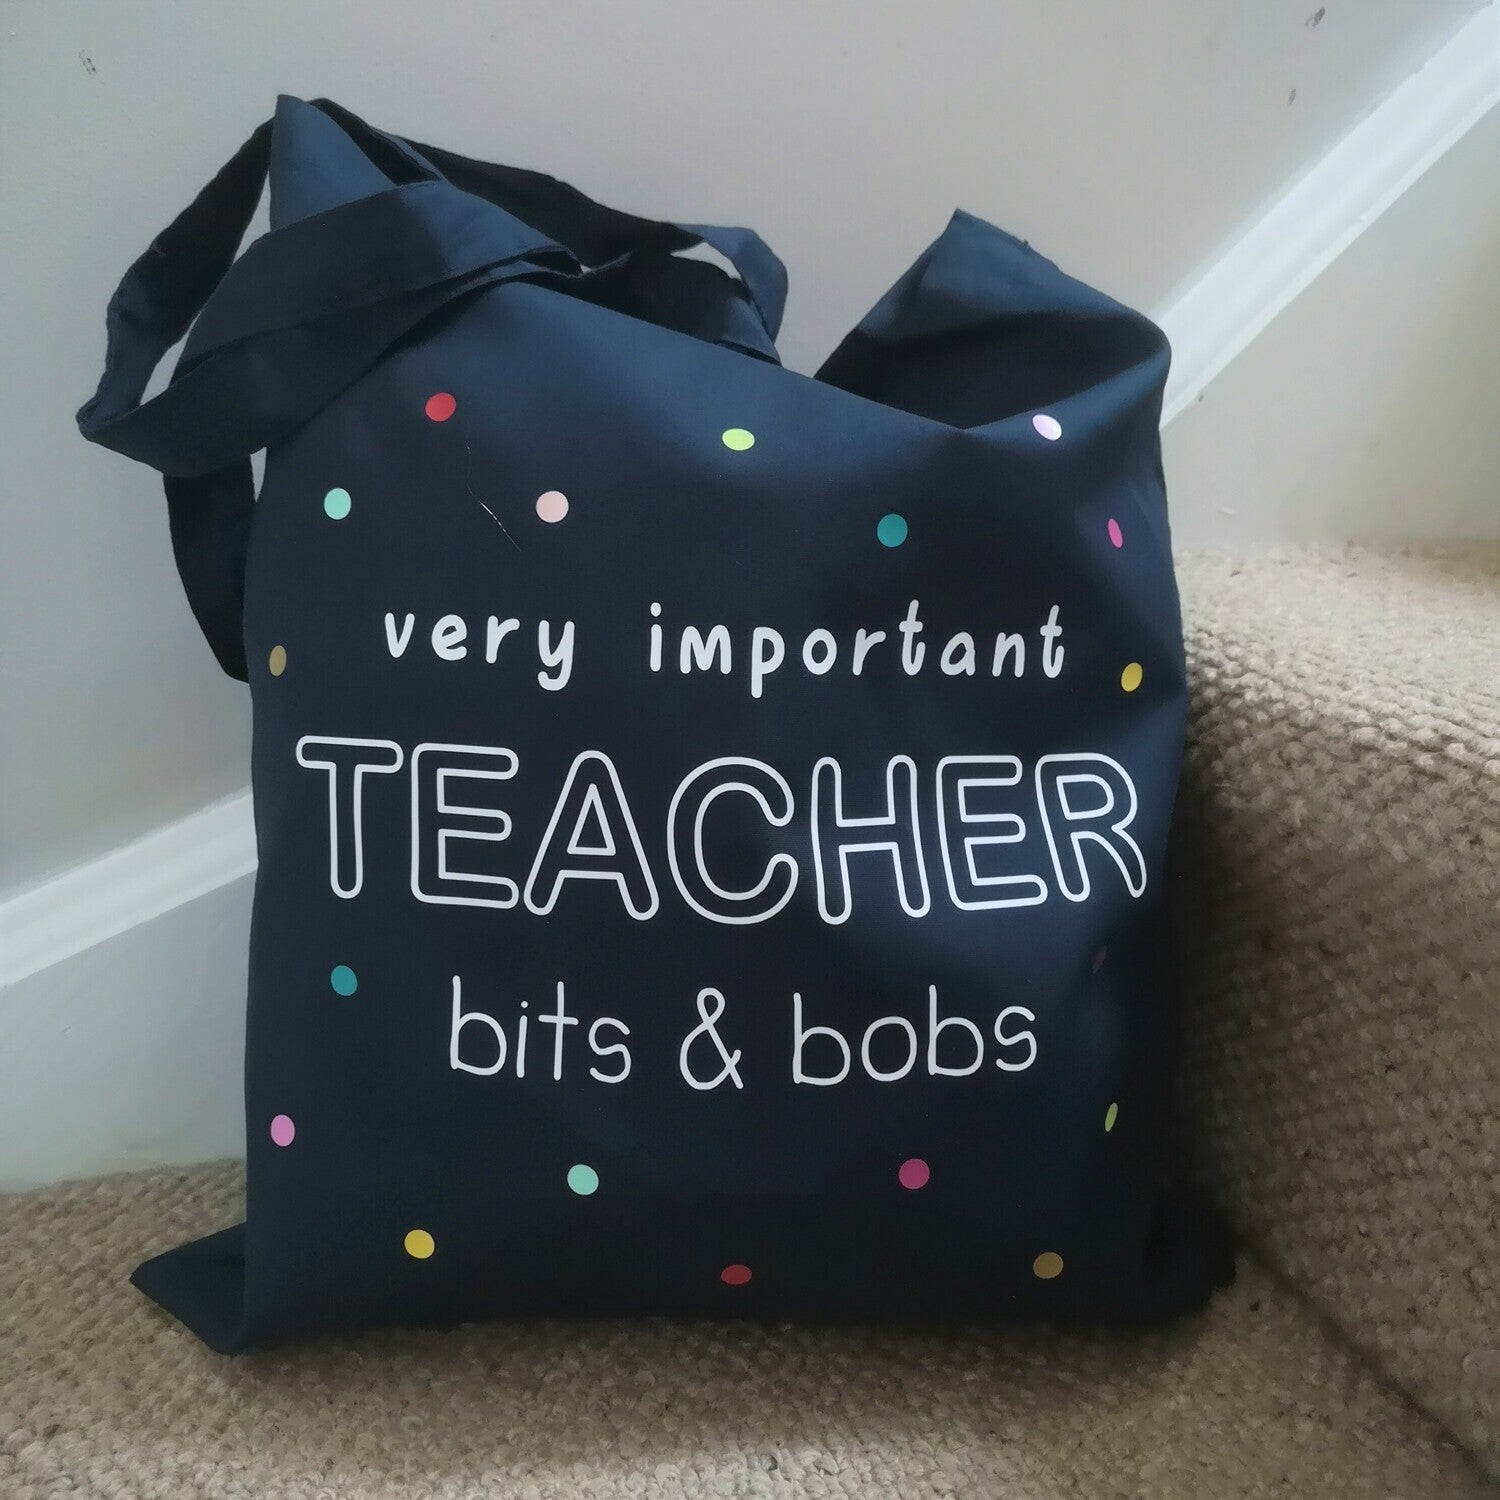 A personalised lightweight black cotton tote with VERY IMPORTANT TEACHER BITS & BOBS on it. The text is surrounded with multicoloured polkadots